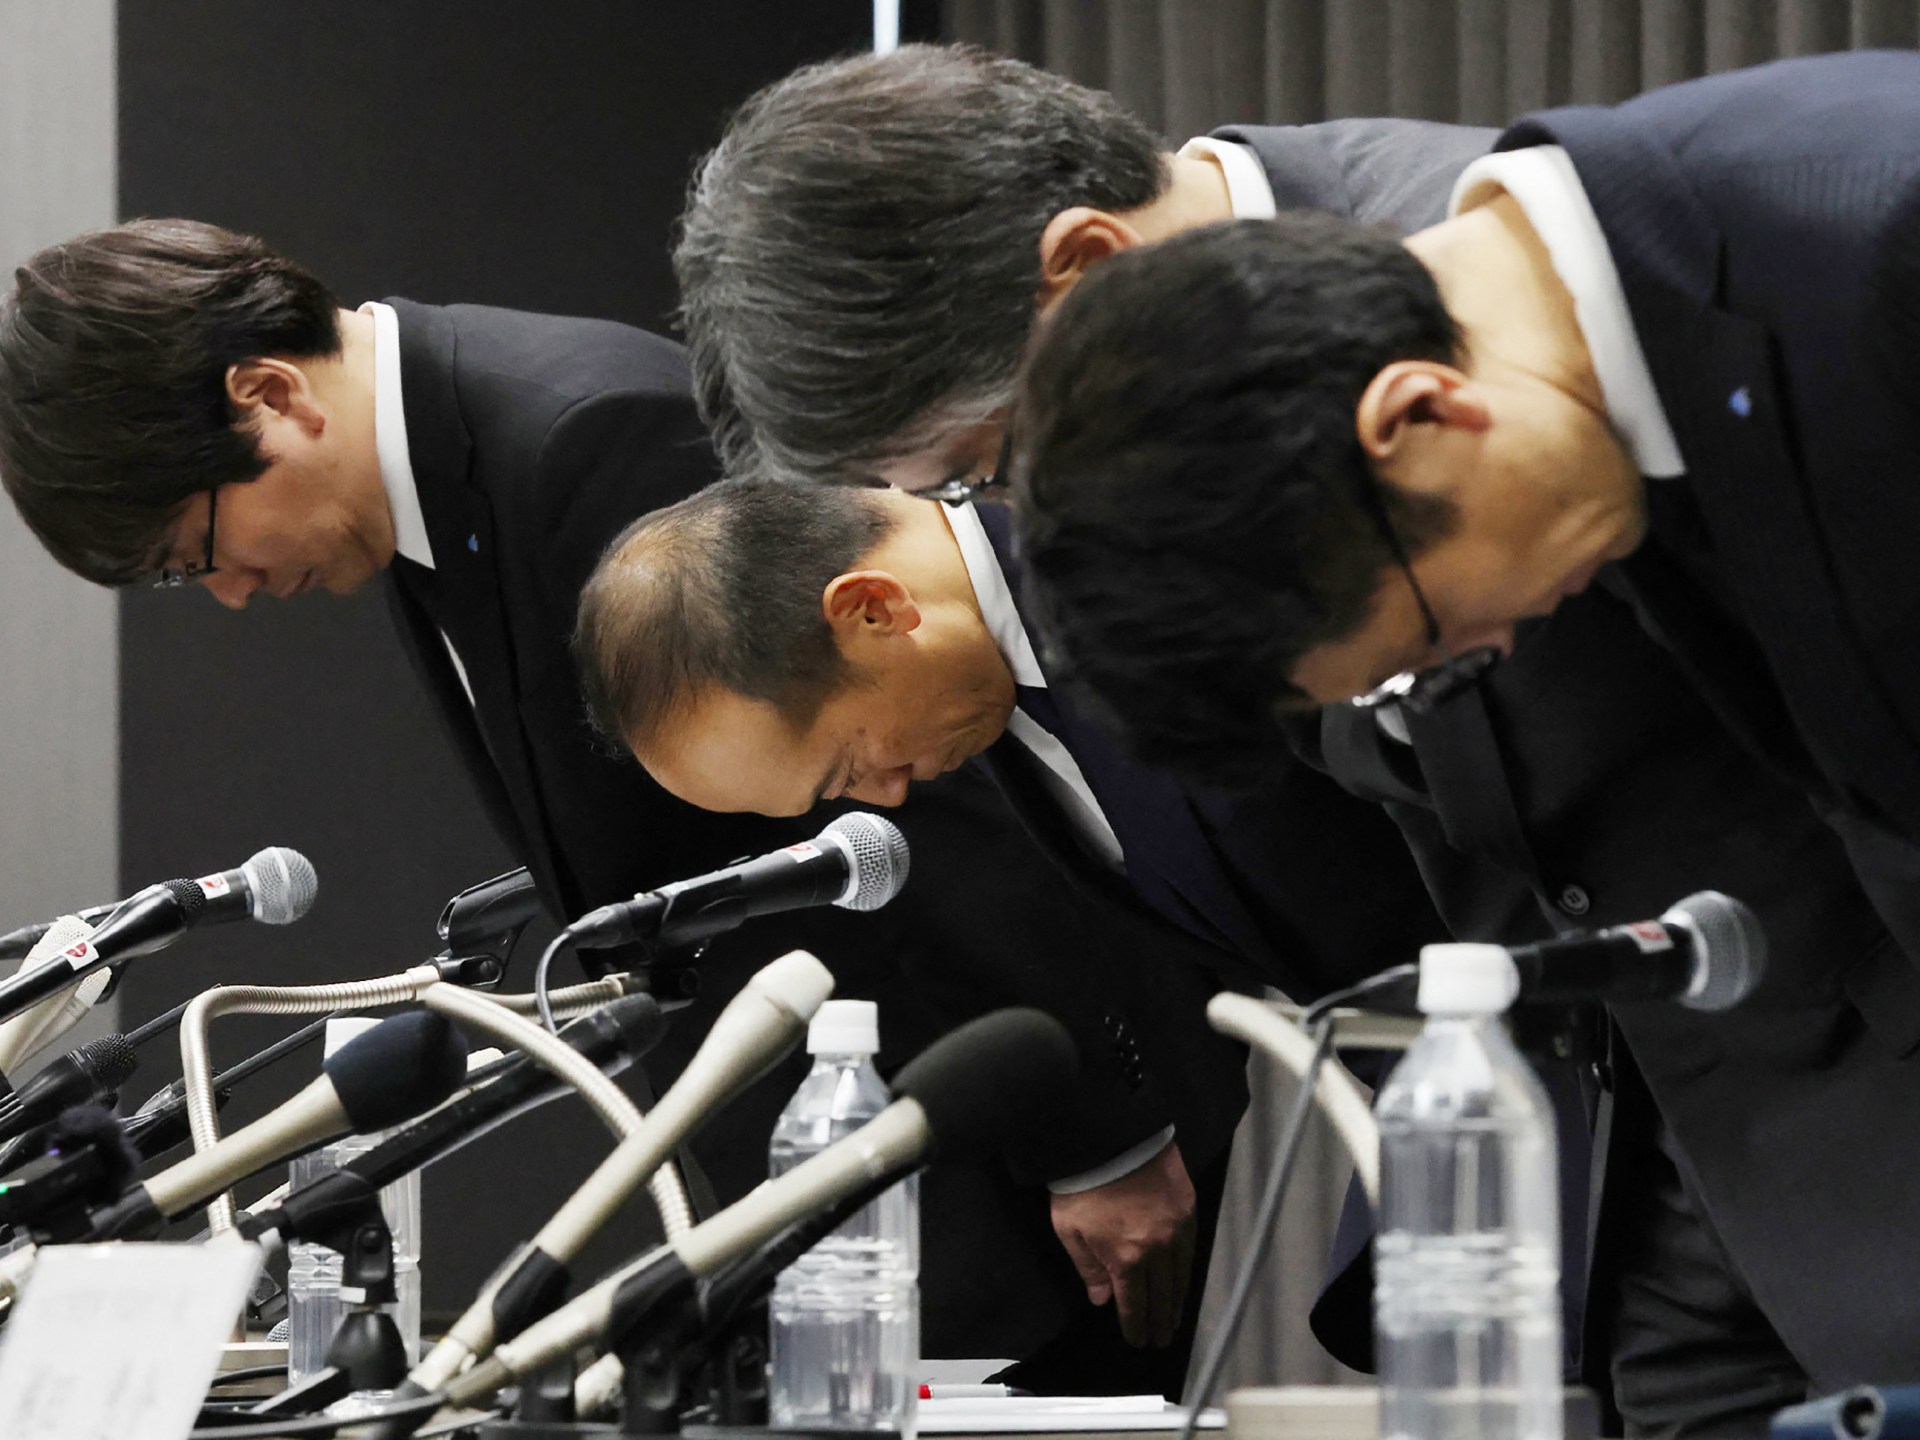 Japan raids factory making health supplements linked to deaths | Health News